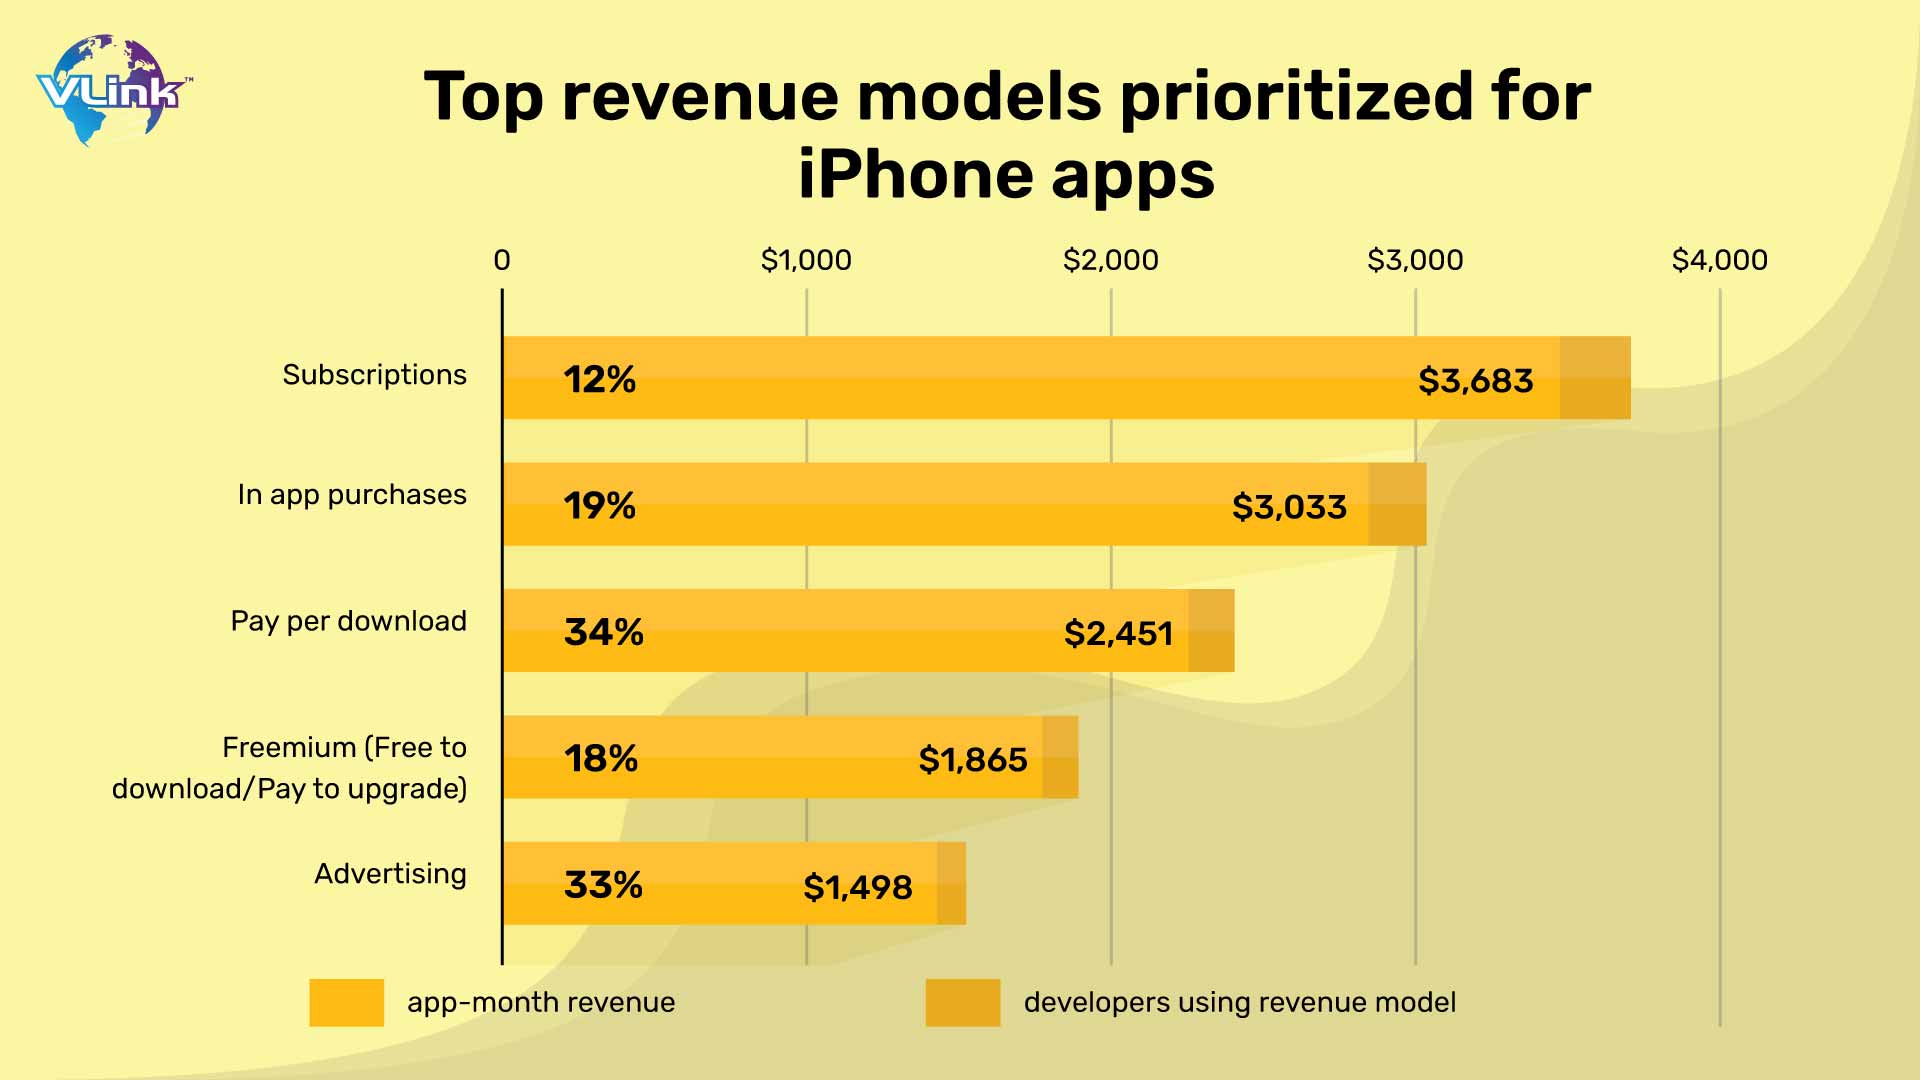 Top revenue models prioritized for iPhone apps